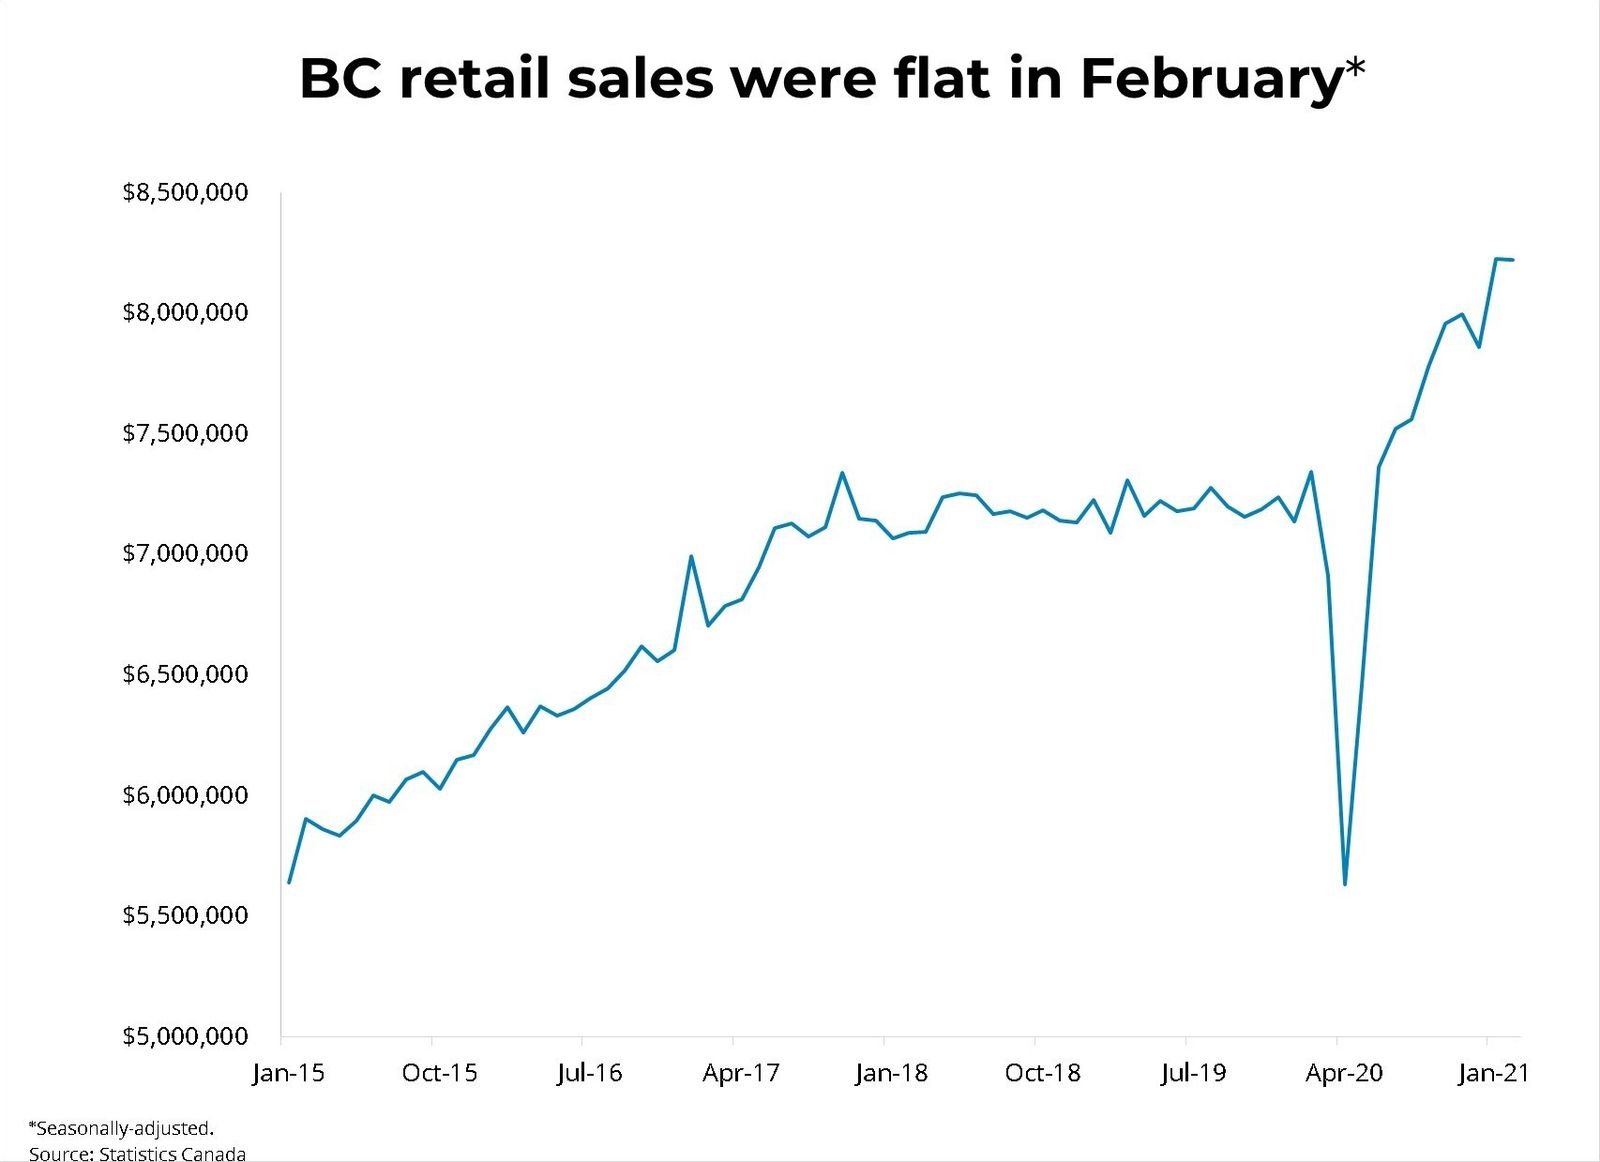 Canadian Retail Sales (February 2021) - April 28, 2021